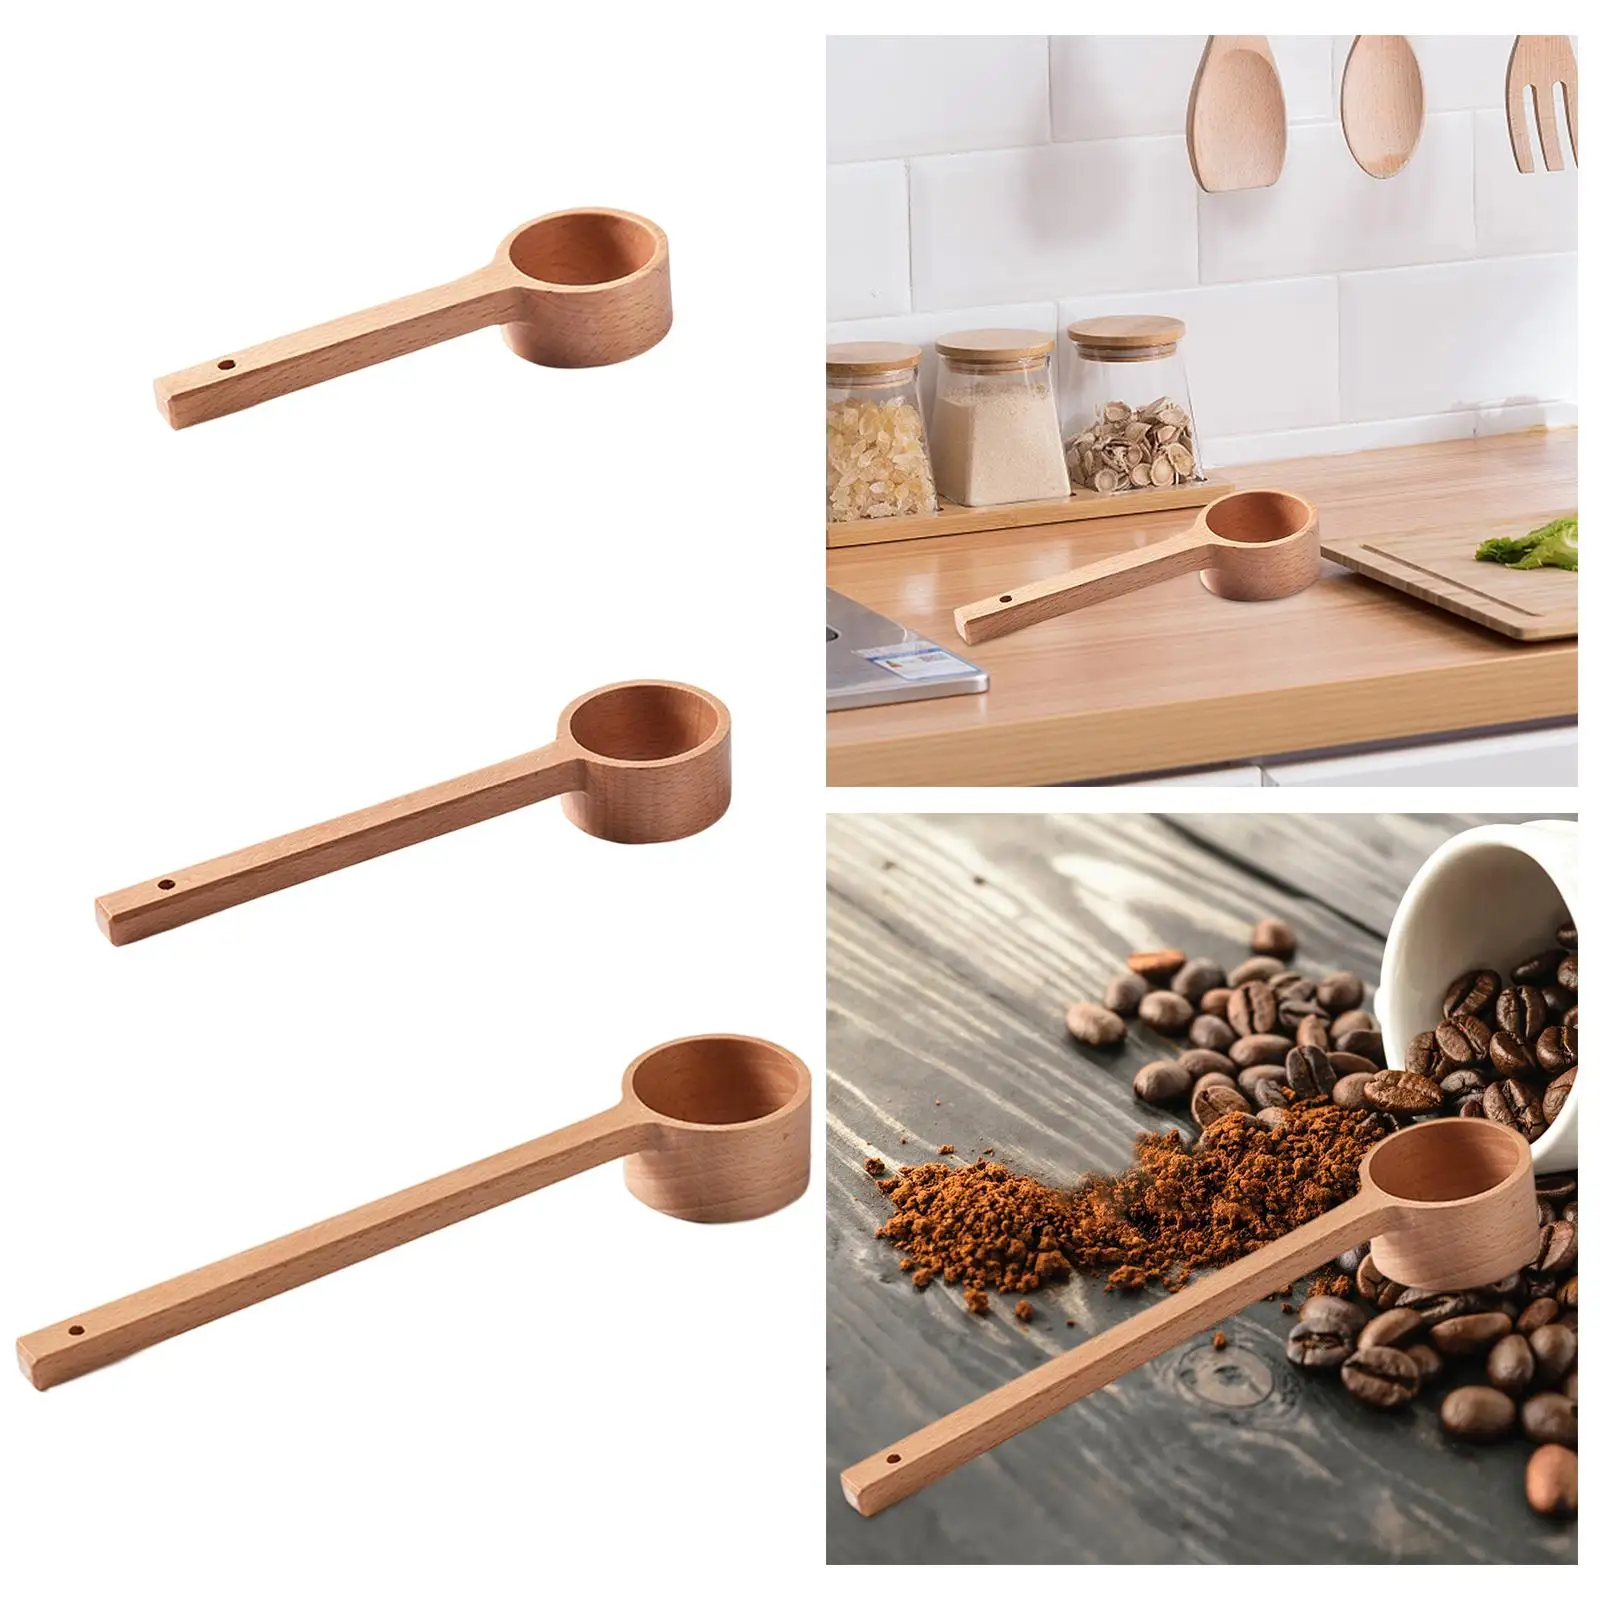 Wooden Measure Spoon Tablespoon Portable Baking Utensil Durable Attachments Coffee Spoon Measuring for Home Cafe Bean